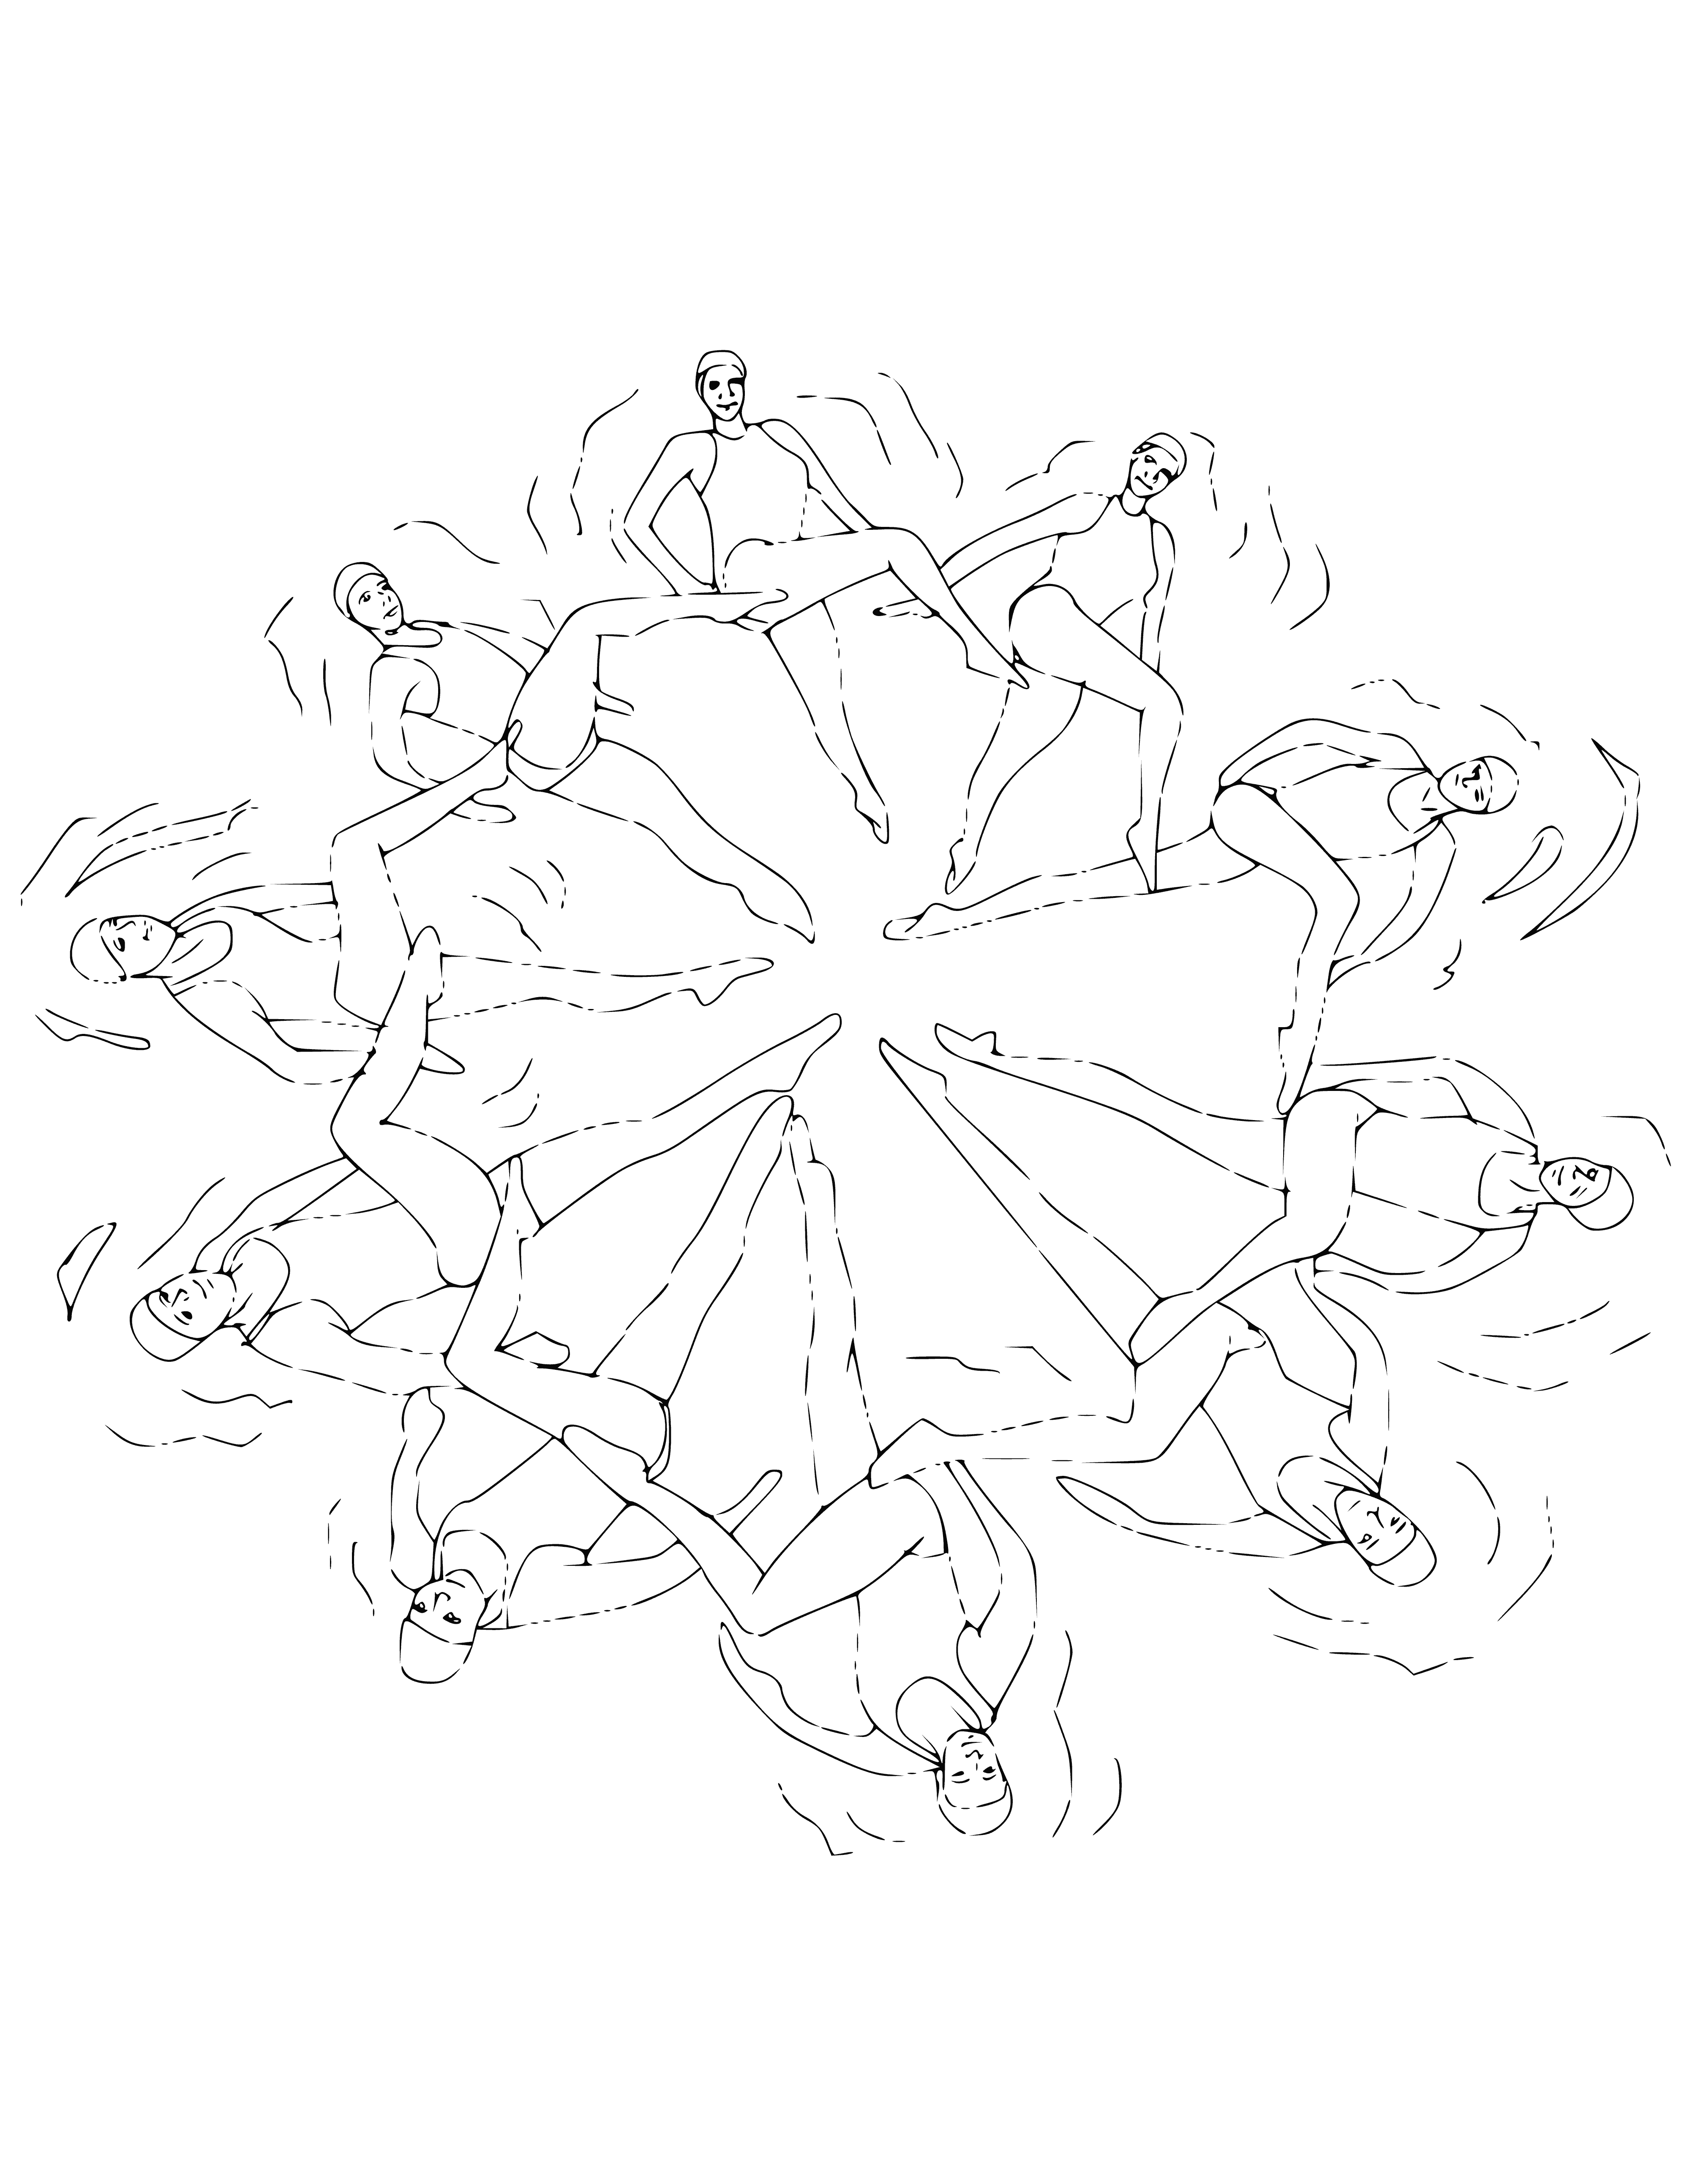 coloring page: Two swimmers, synchronized in their swimsuits, caps, and strokes. Serious expressions as hands hold tight.